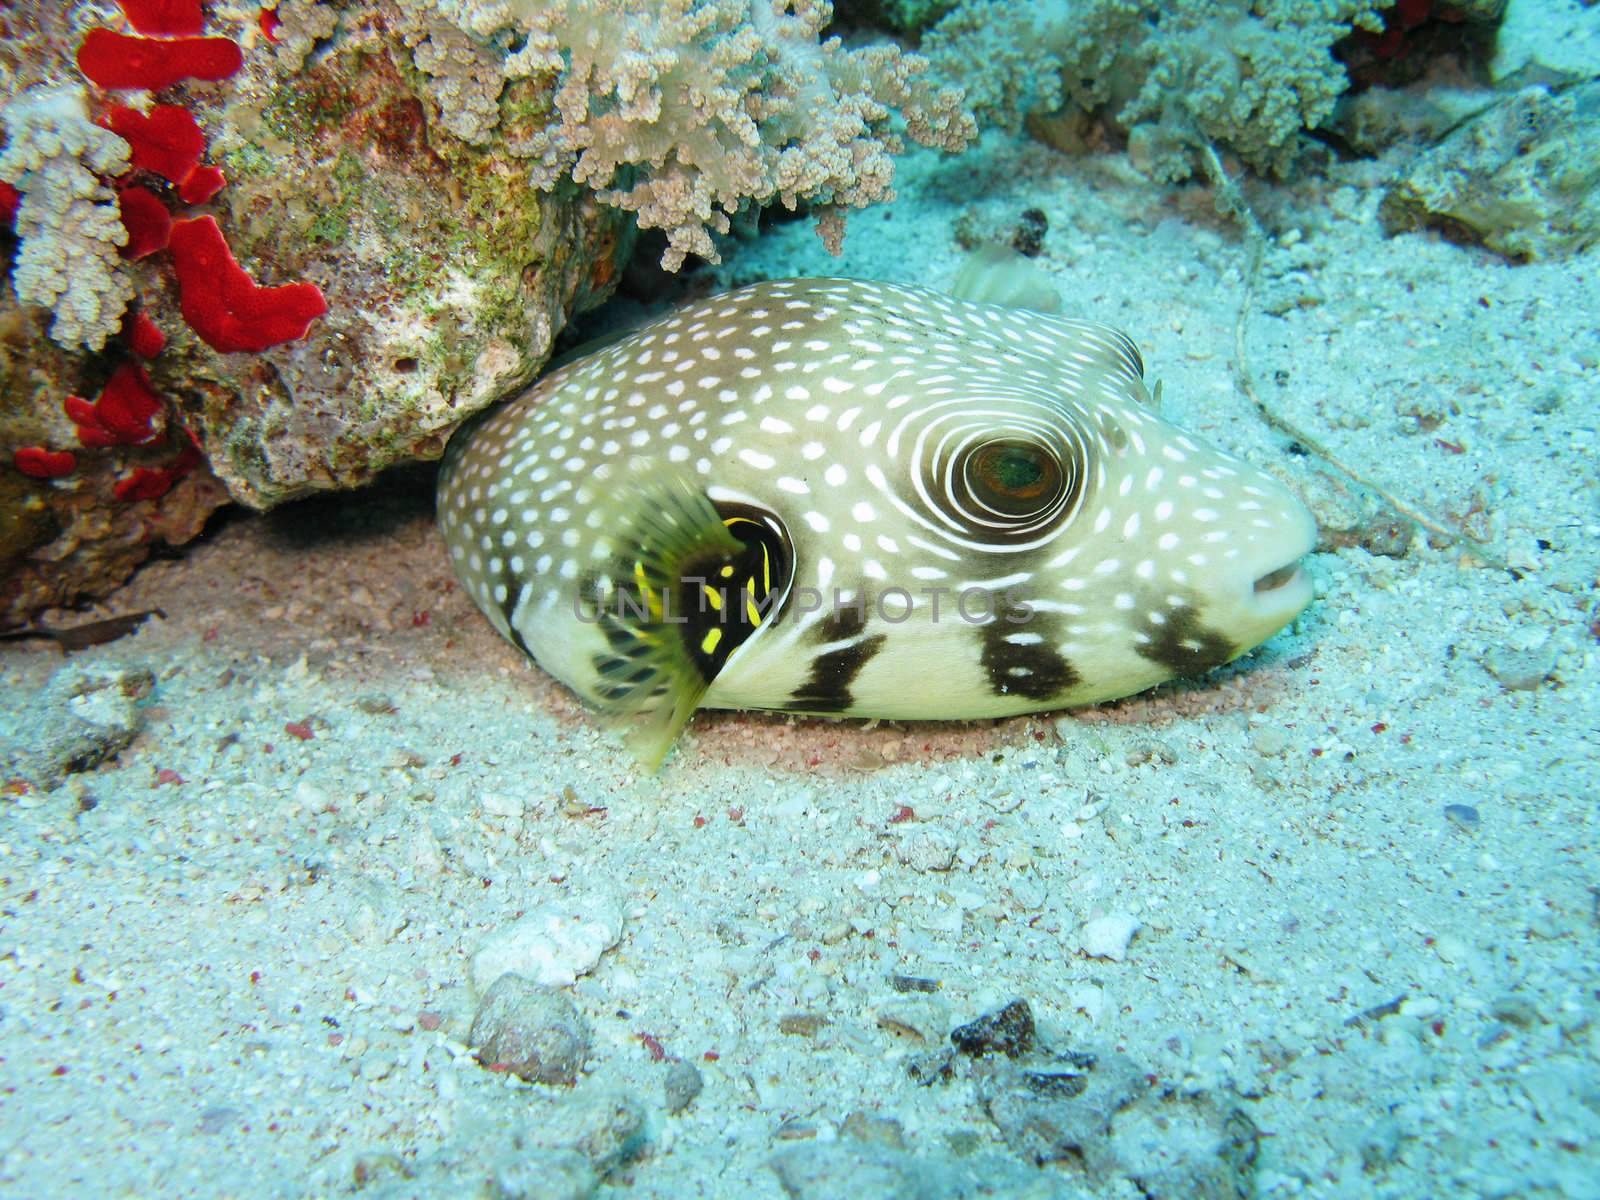 "Arothron Stellatus" better known as Star Puffer fish in the Red Sea.